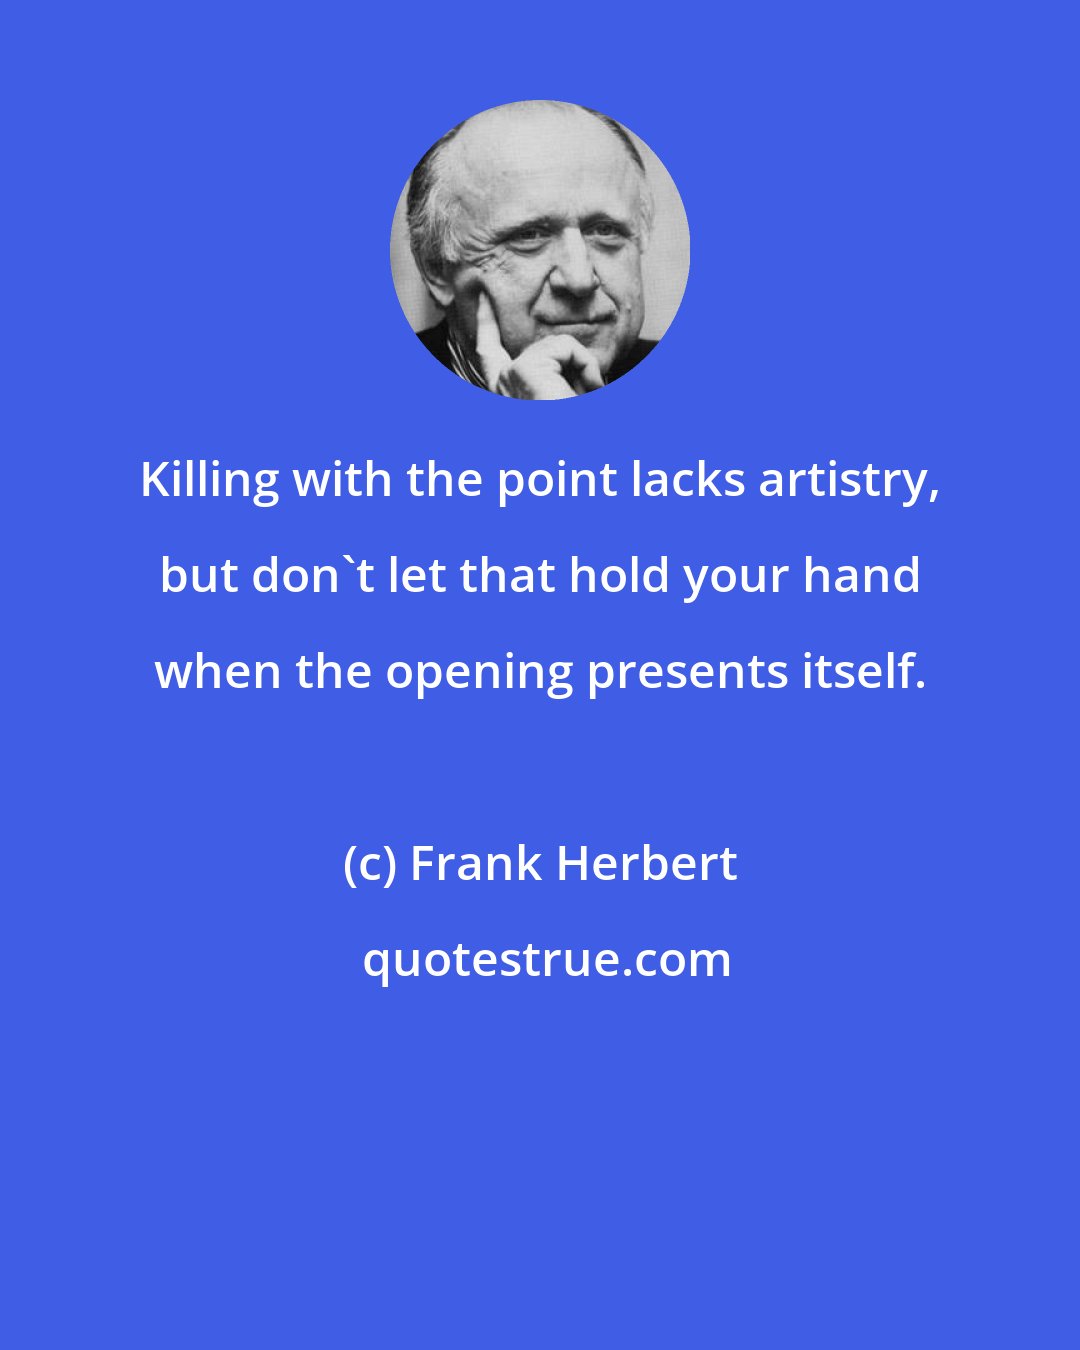 Frank Herbert: Killing with the point lacks artistry, but don't let that hold your hand when the opening presents itself.